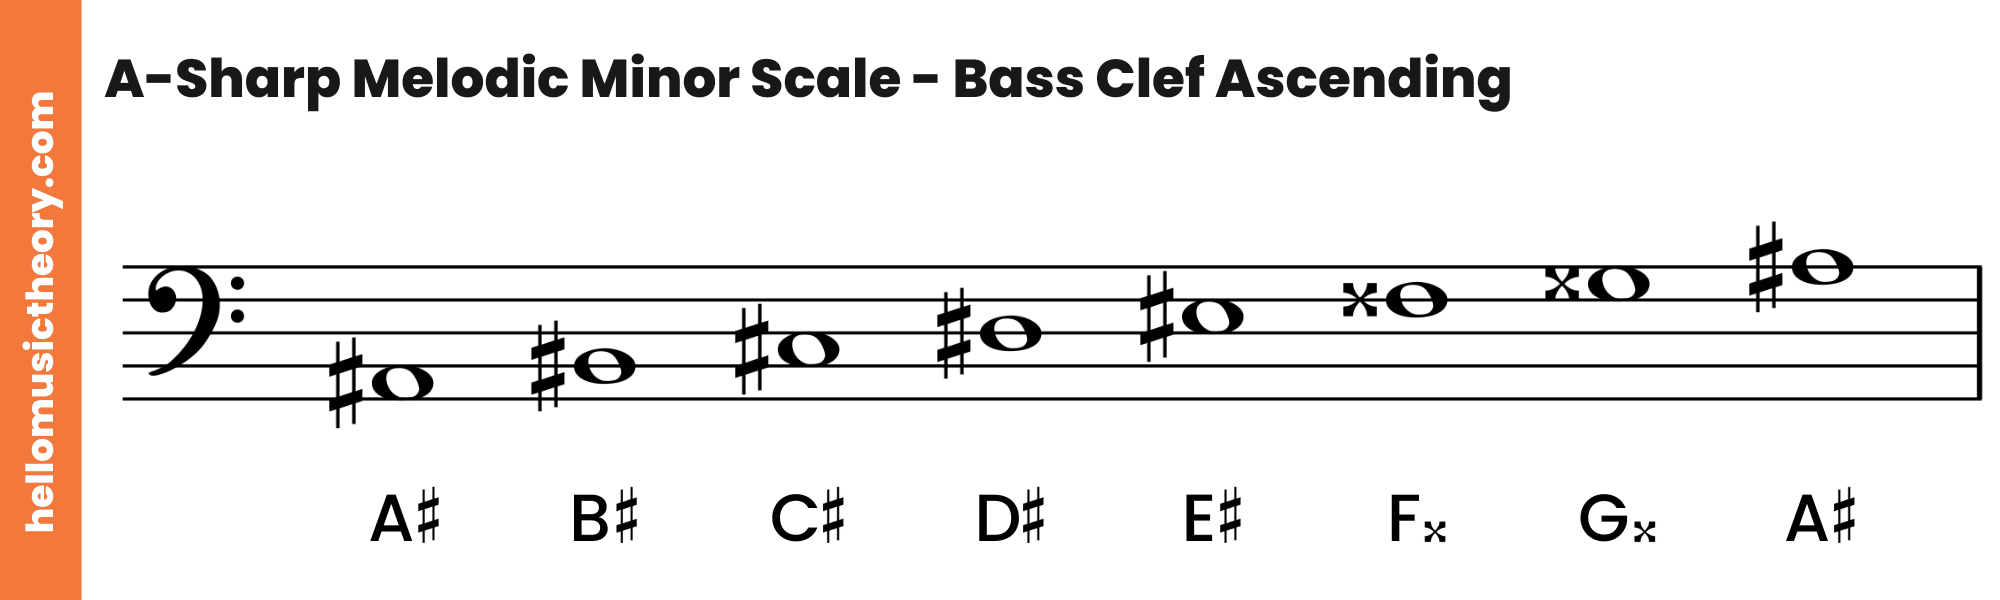 A-Sharp Melodic Minor Scale Bass Clef Ascending